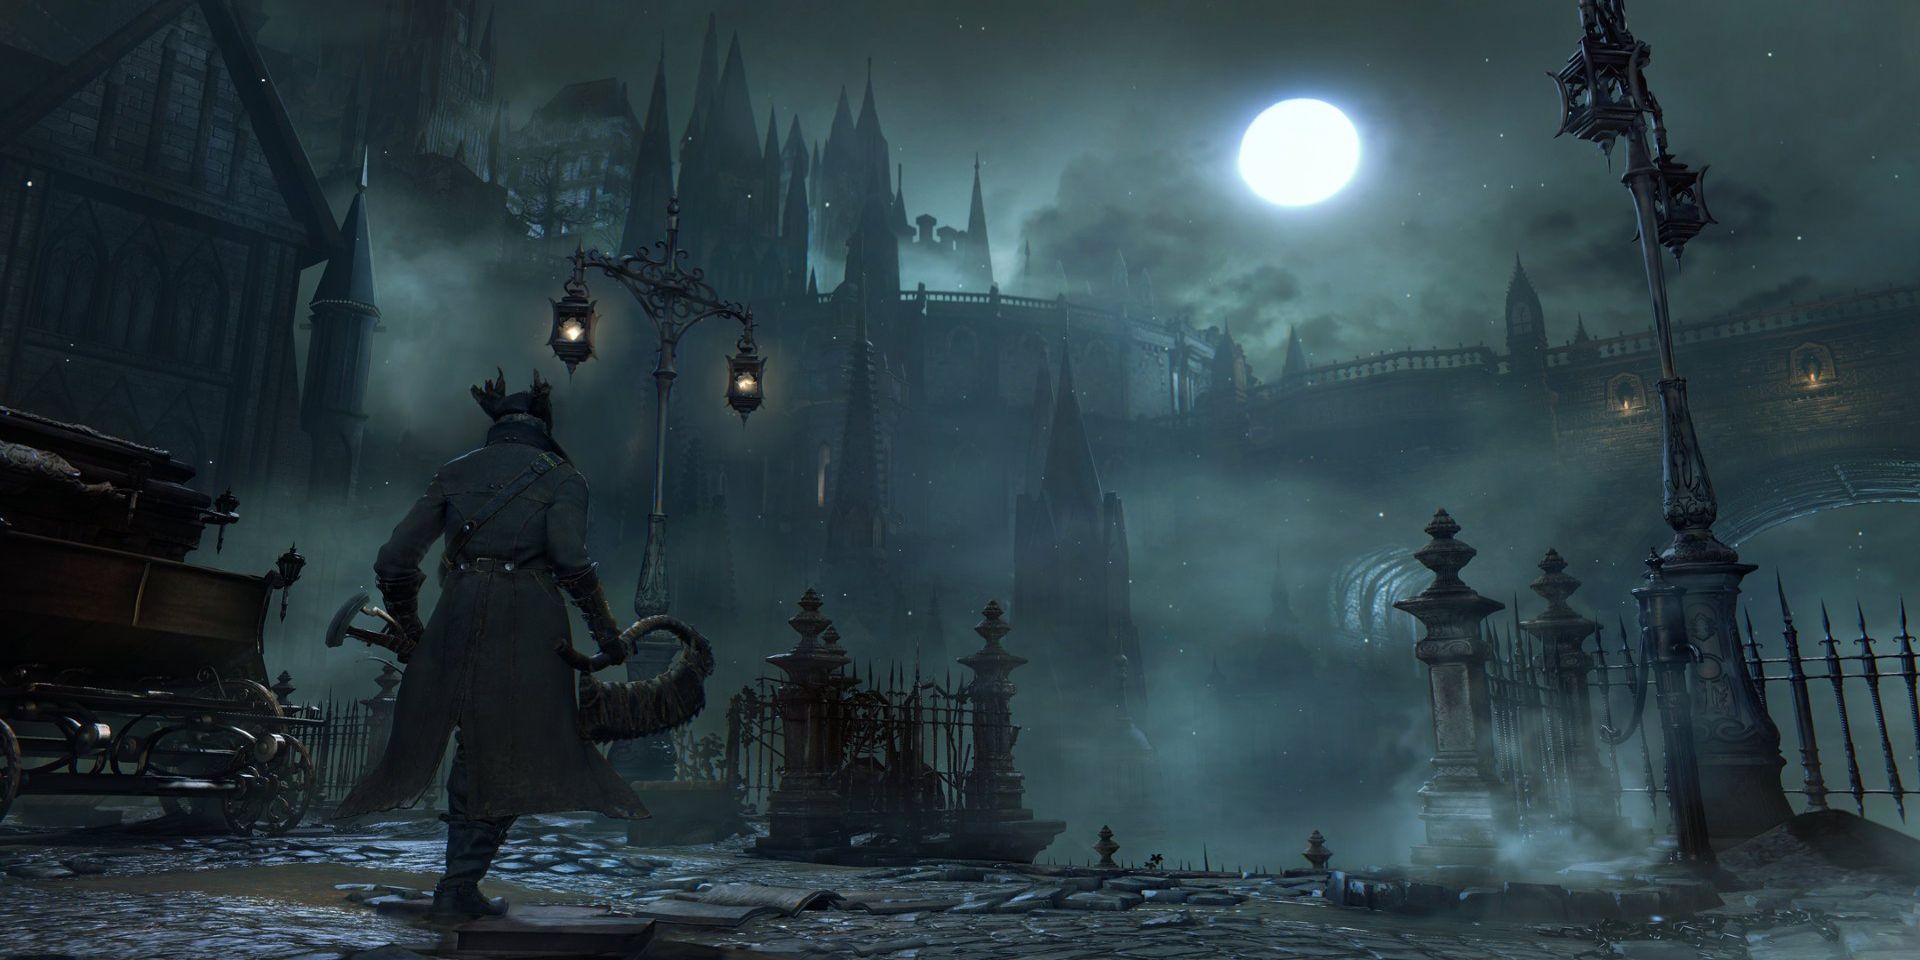 The city of Yarnham lit by lampposts at night in Bloodborne.